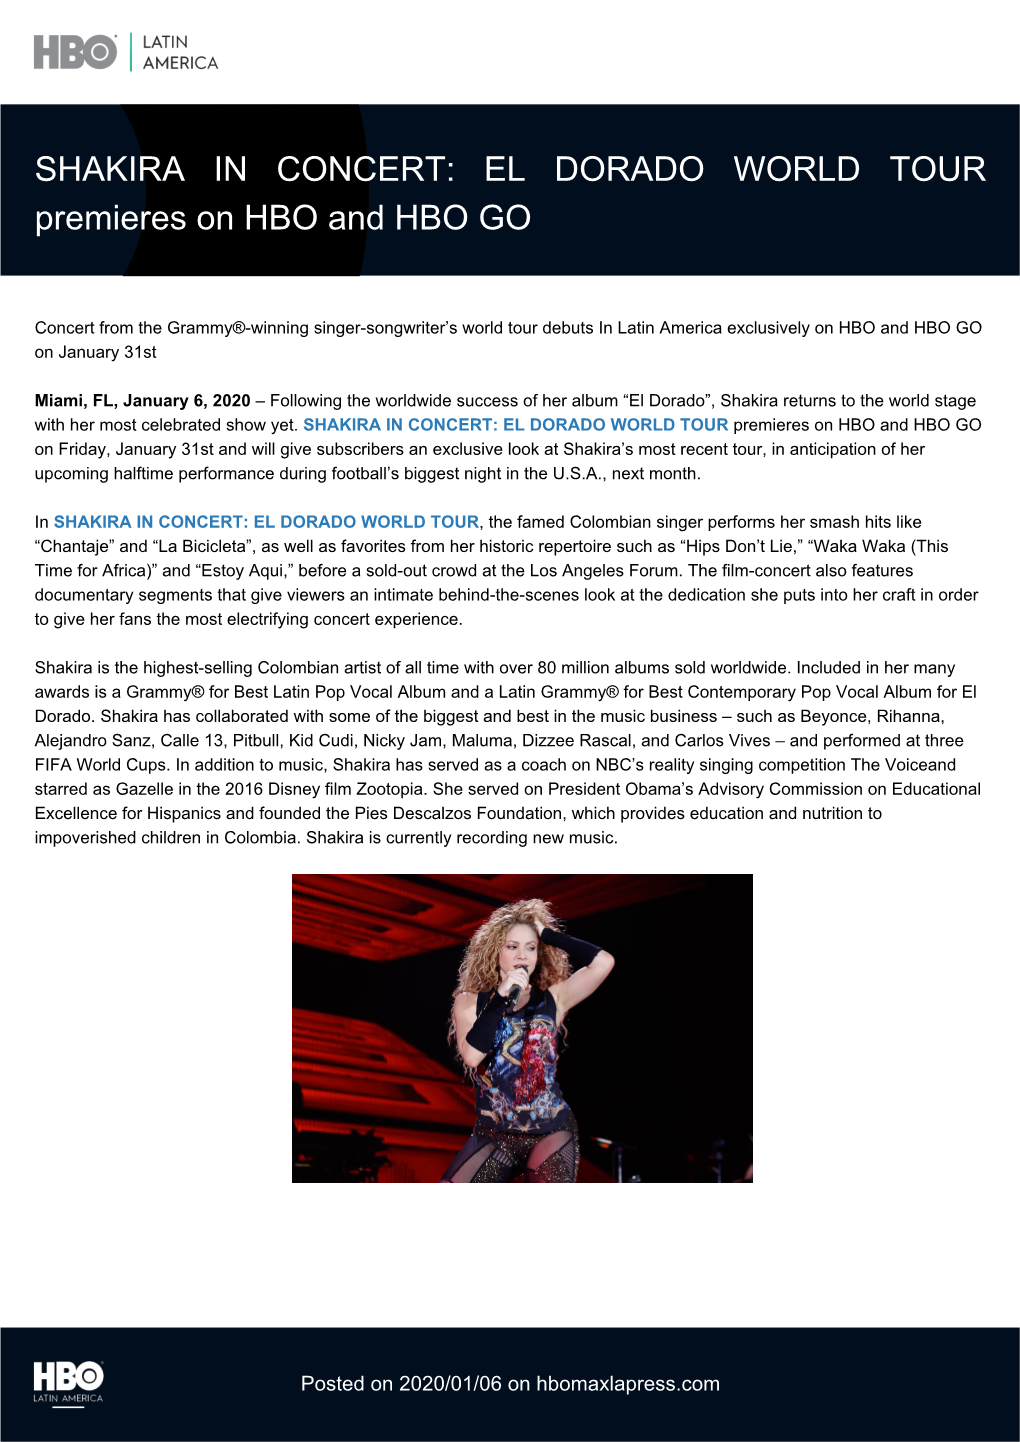 SHAKIRA in CONCERT: EL DORADO WORLD TOUR Premieres on HBO and HBO GO